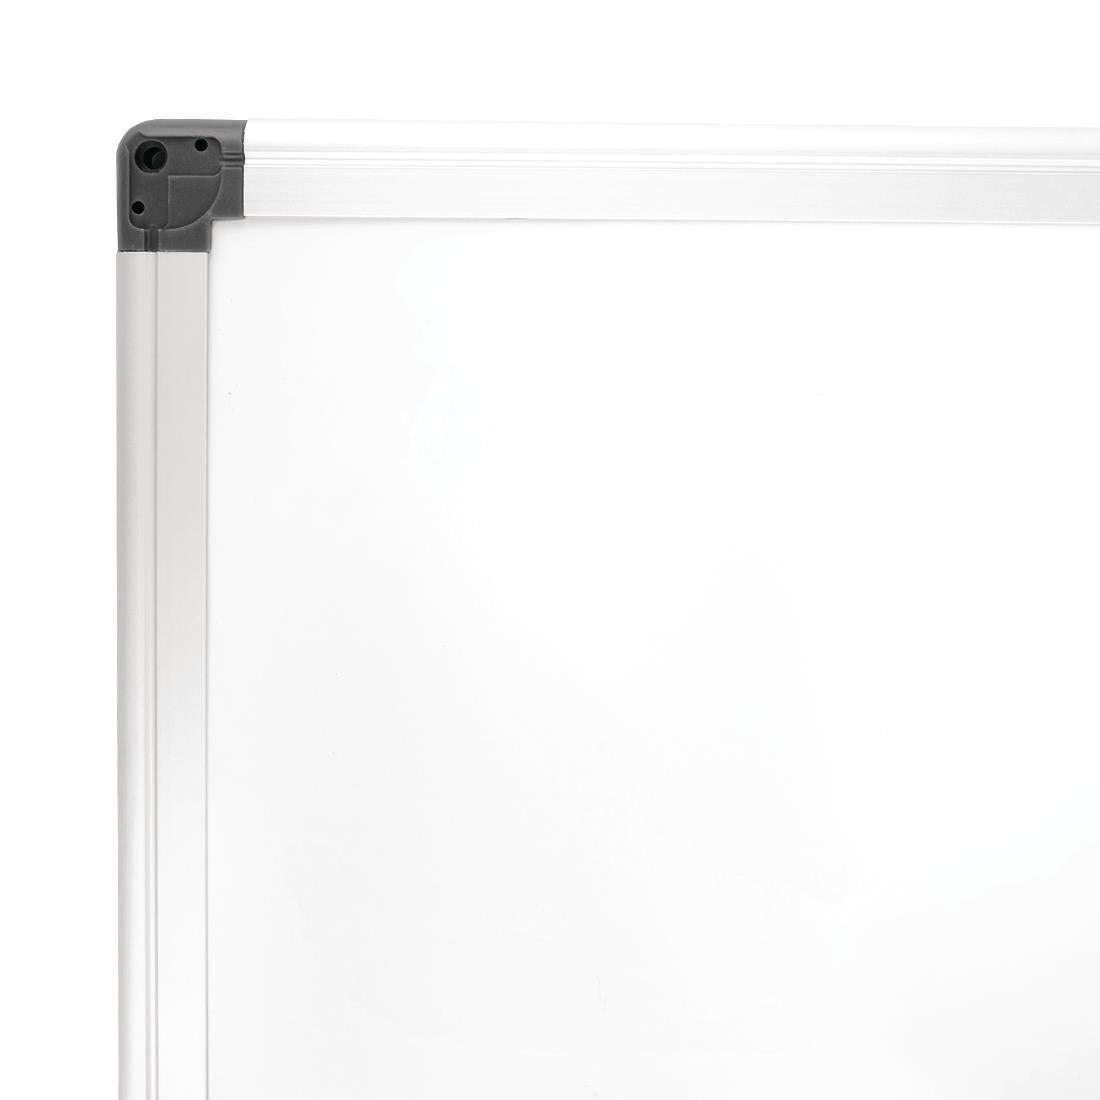 GG045 Olympia White Magnetic Board JD Catering Equipment Solutions Ltd